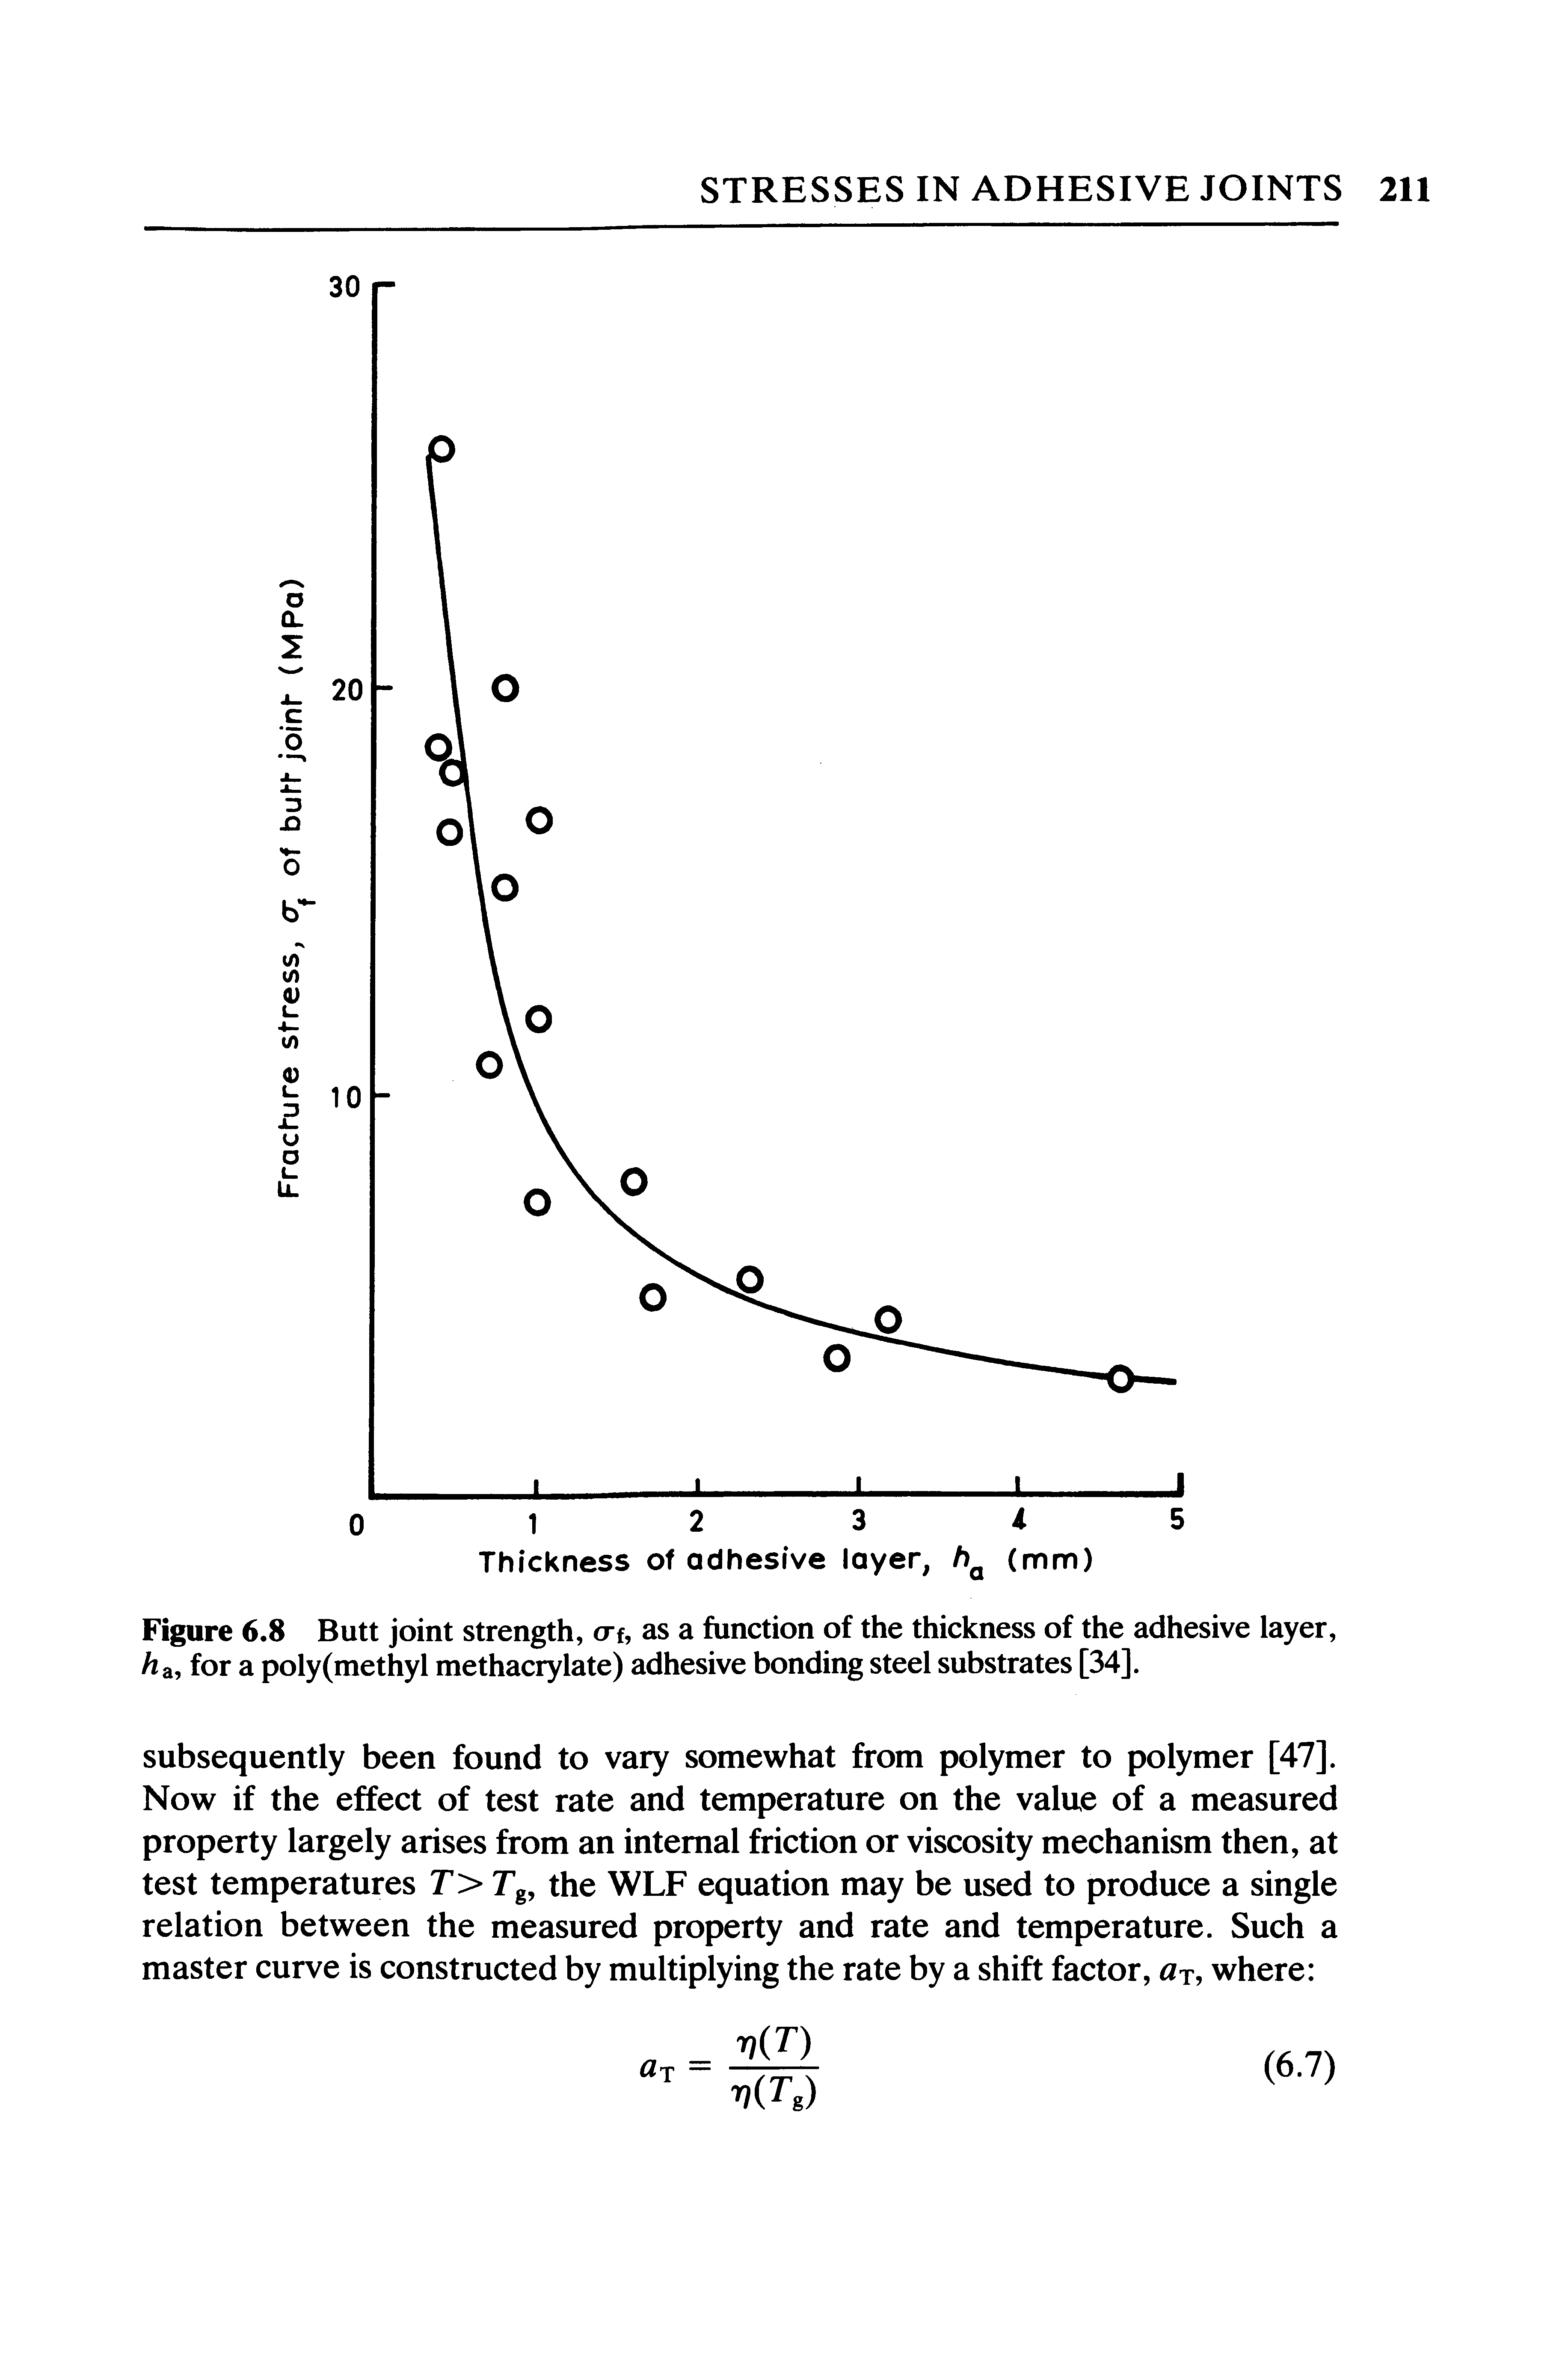 Figure 6.8 Butt joint strength, erf, as a function of the thickness of the adhesive layer, /la, for a poly (methyl methacrylate) adhesive bonding steel substrates [34].